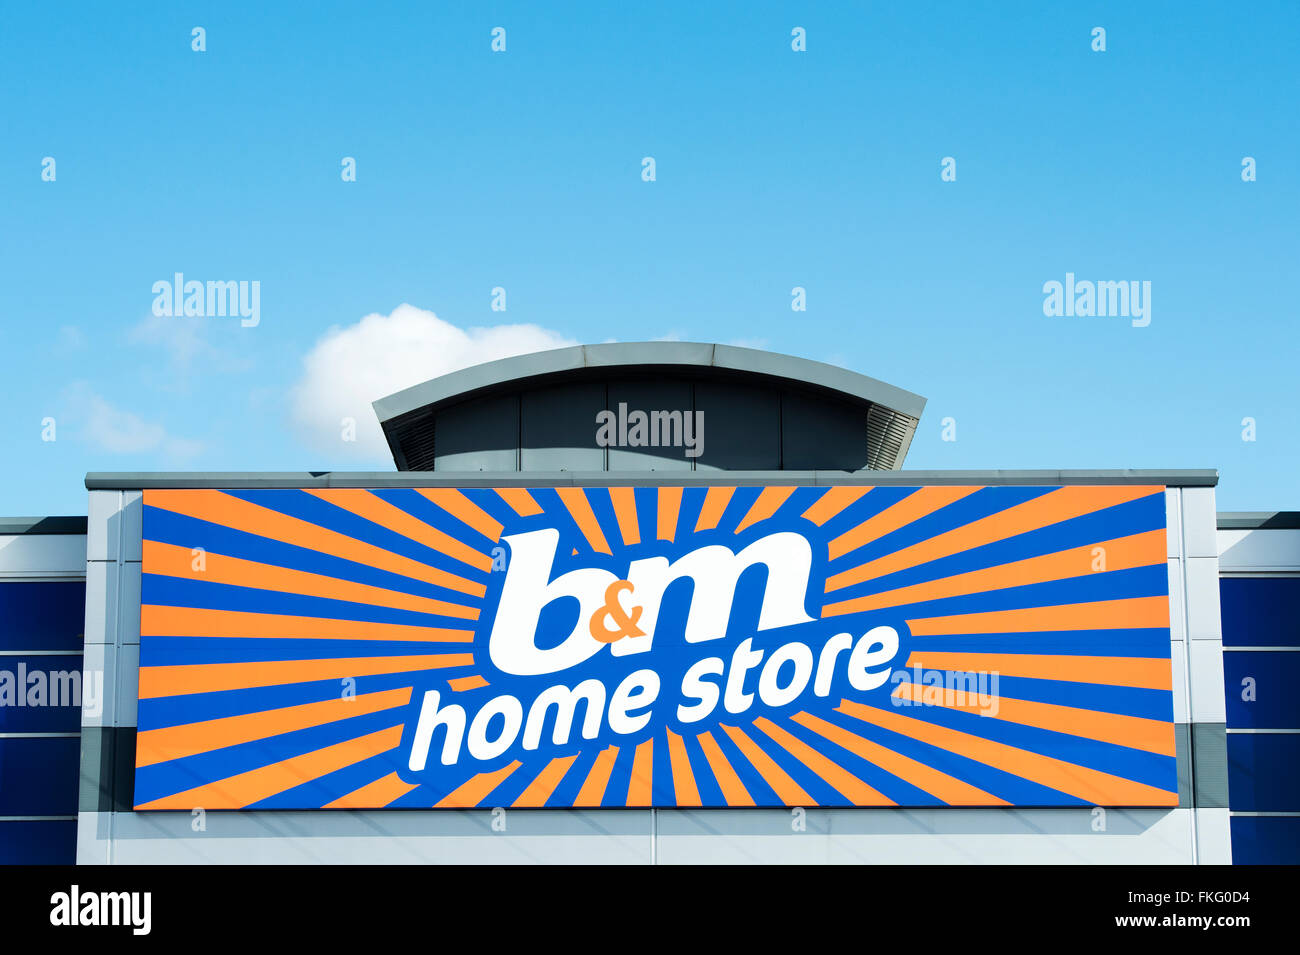 B & M homestore sign against a blue sky Stock Photo